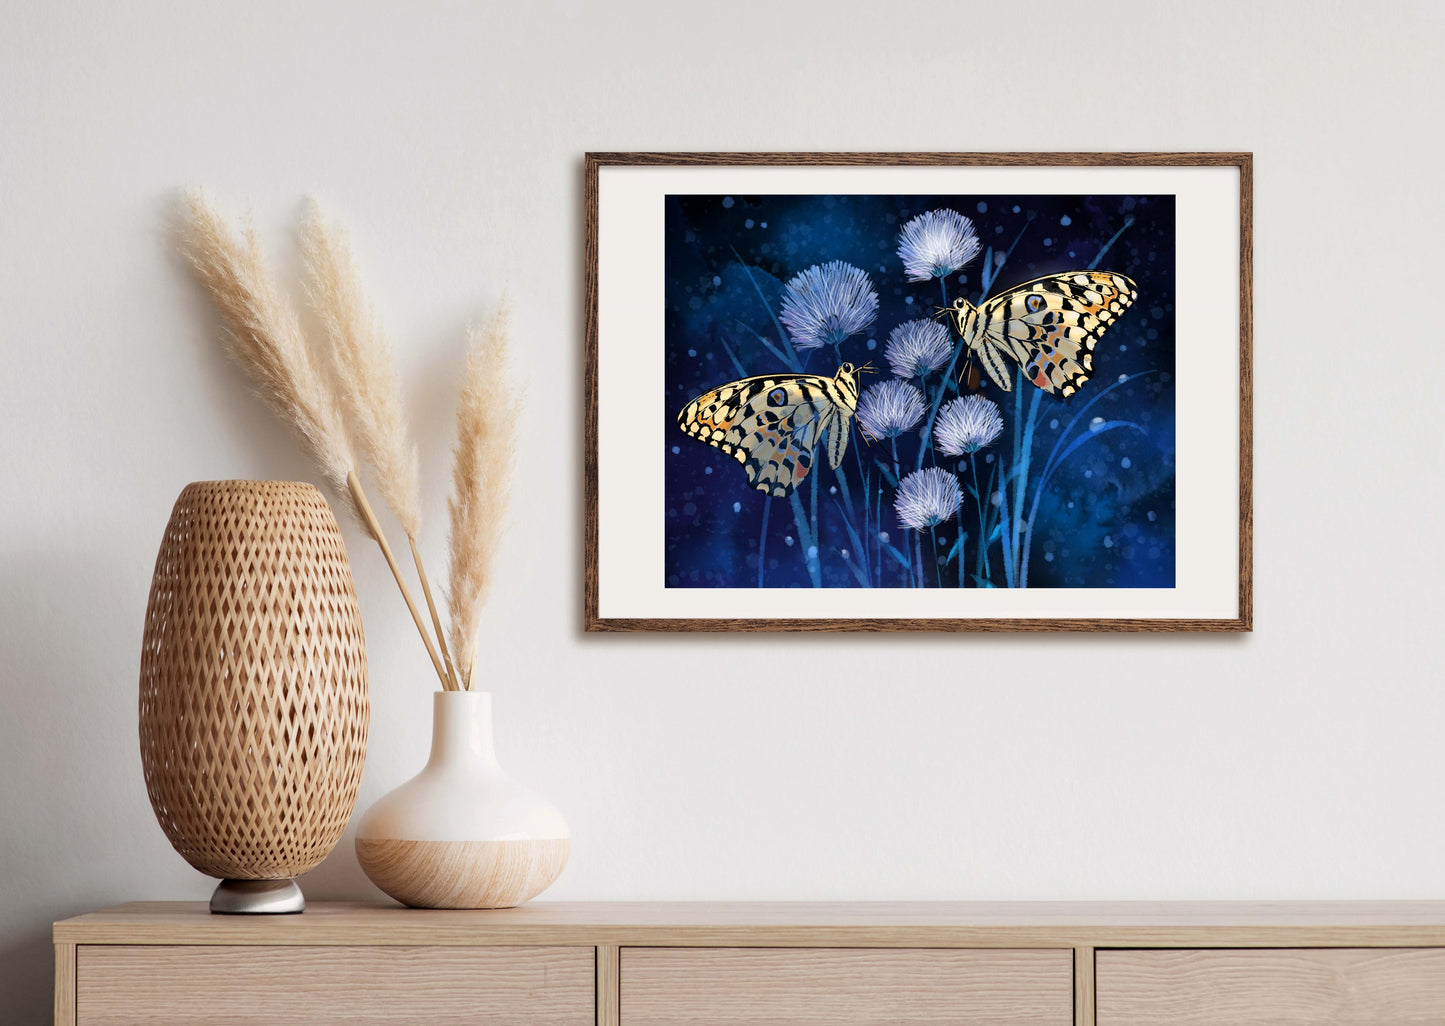 Butterfly and Evening Rain - Illustrated Print by Thomas Little